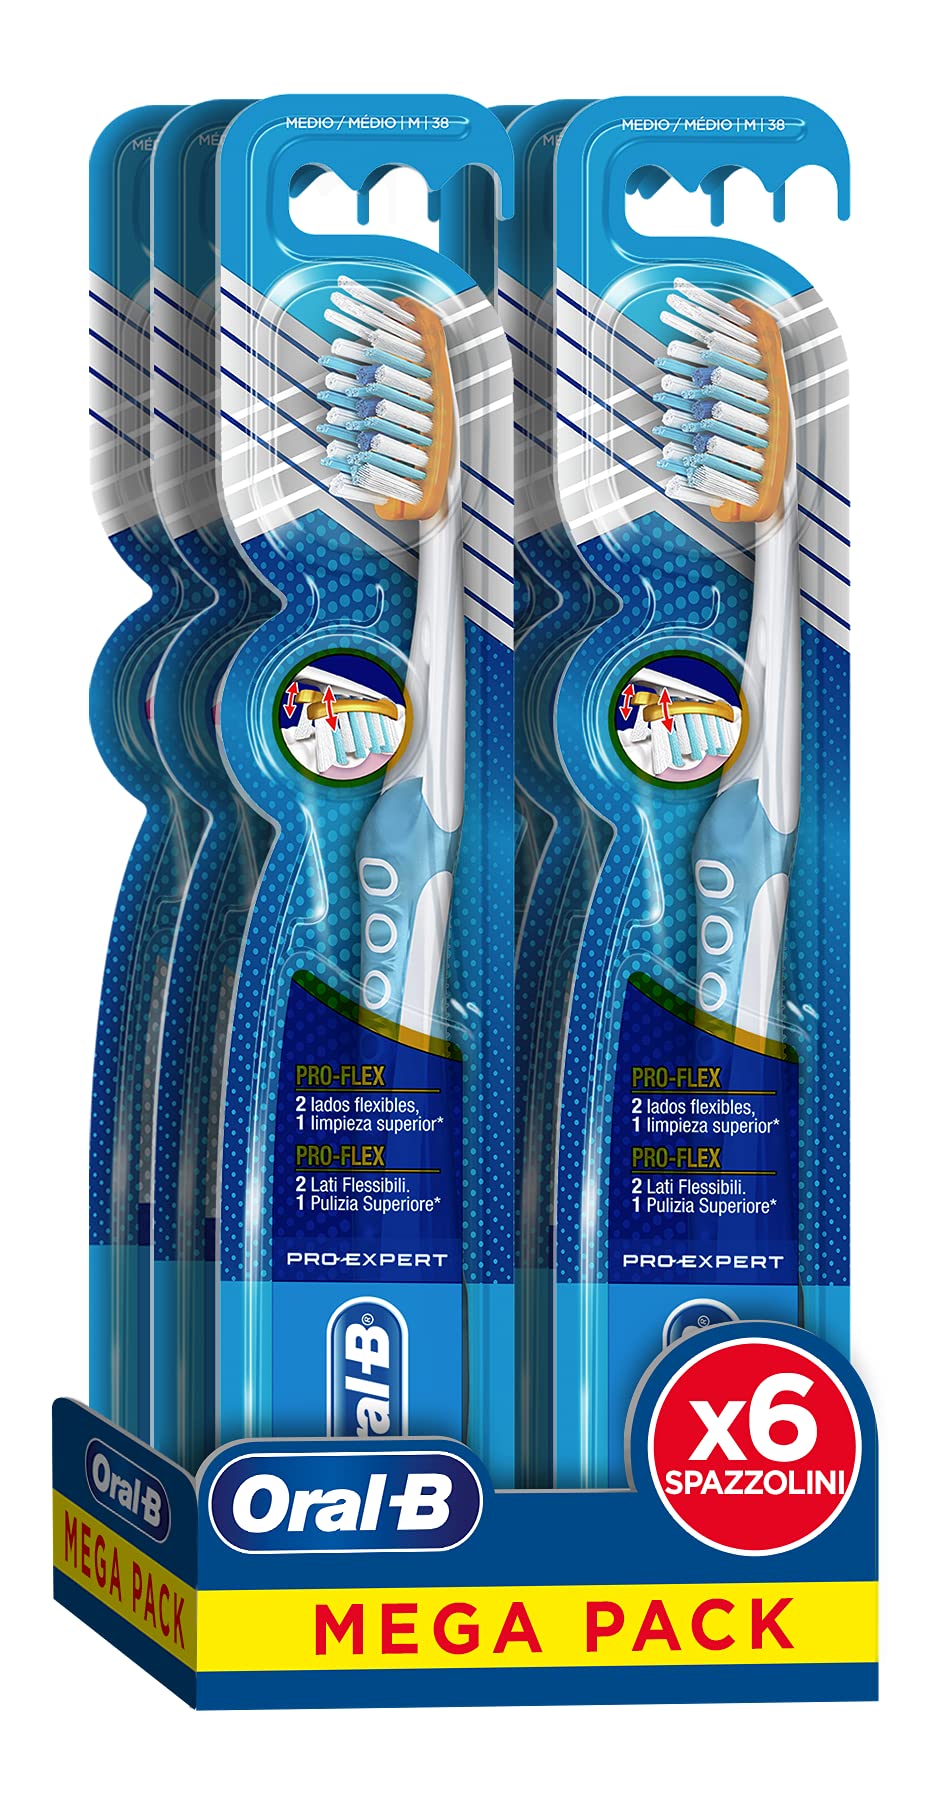 [Australia] - Oral-B Pro-Flex Luxe Manual Toothbrush, with 2 Flexible Sides for Superior Cleaning, Gentle on Gums, Soft Bristles, with Teeth Whitening Action, Size of 6 Toothbrushes 